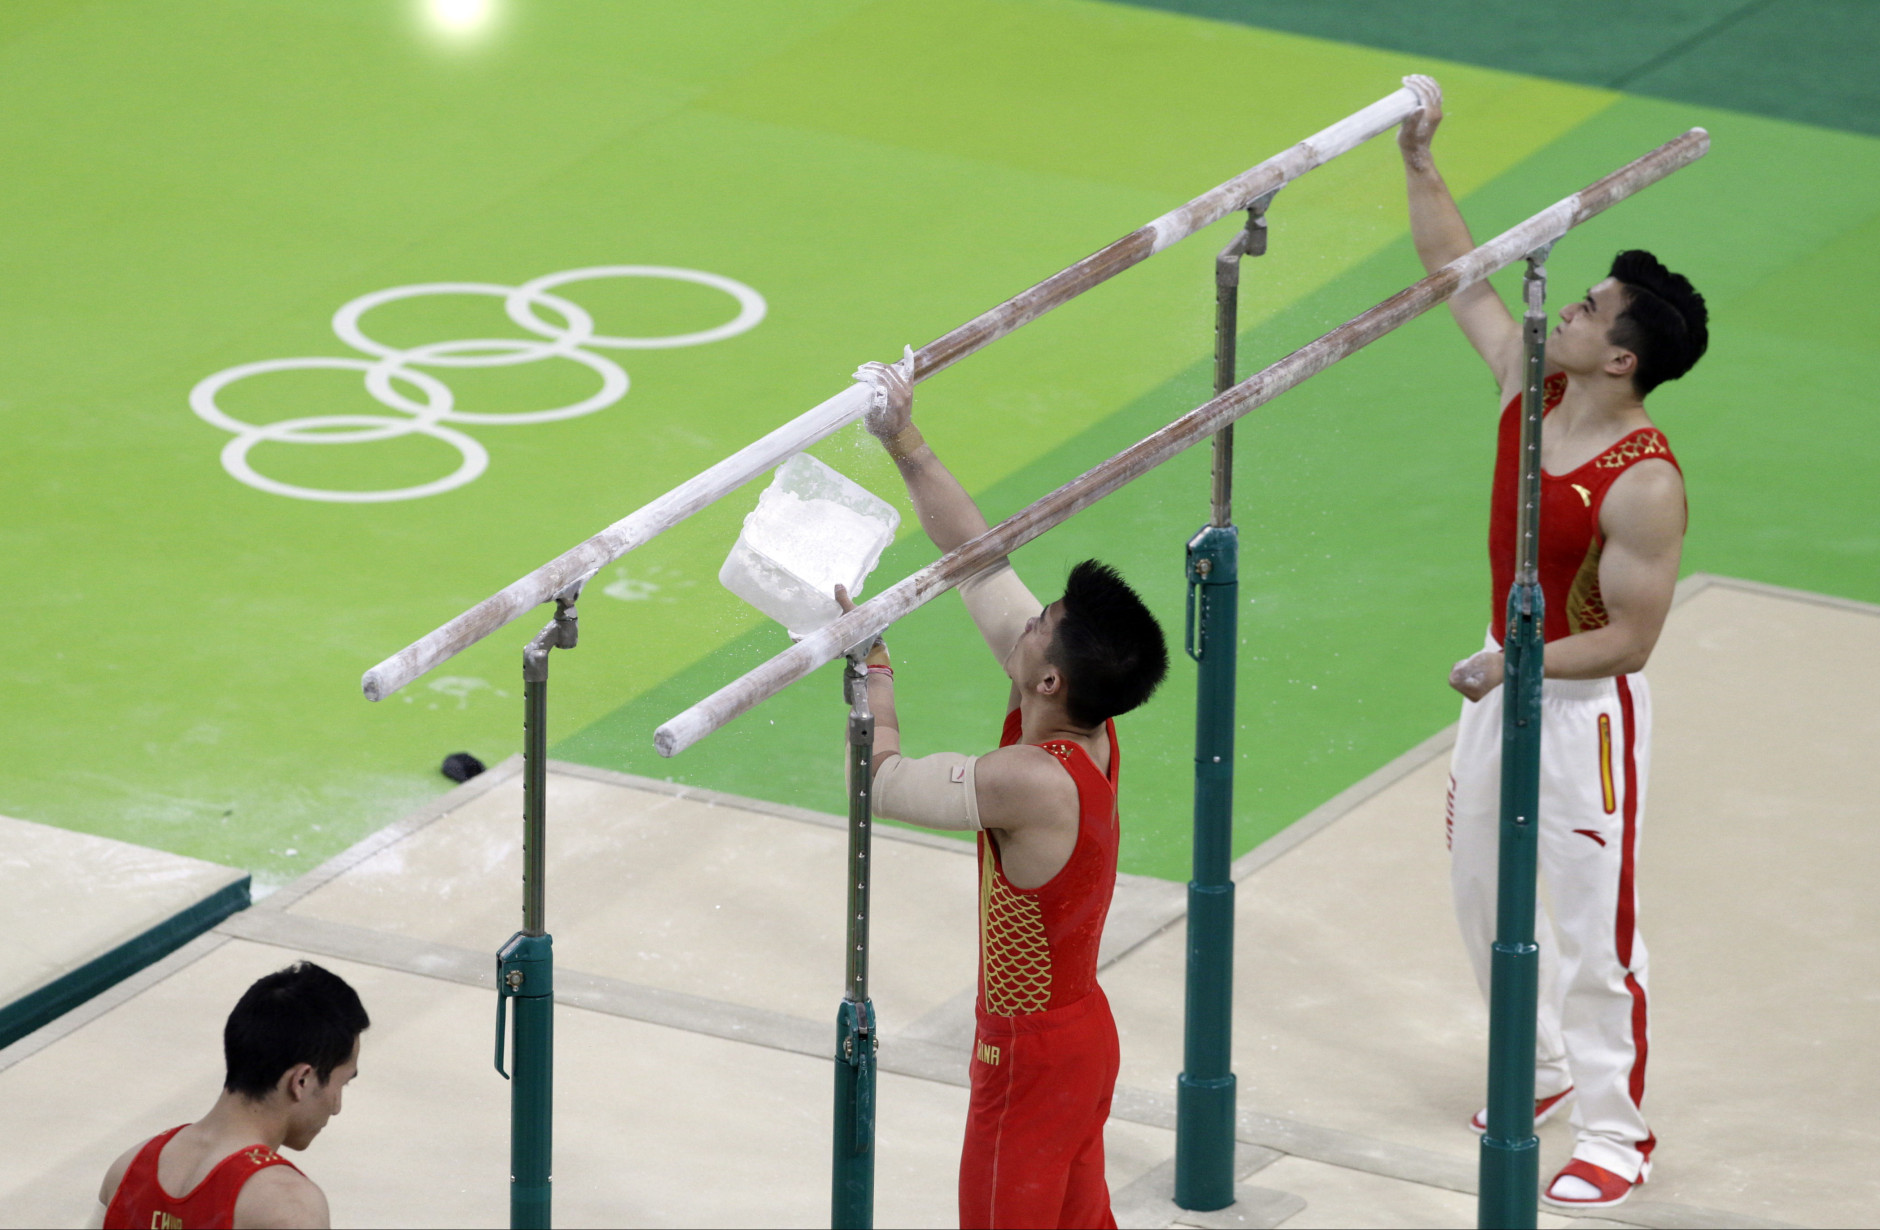 Members of the Chinese gymnastics team prepare the parallel bars before a training session ahead of the 2016 Summer Olympics in Rio de Janeiro, Brazil, Wednesday, Aug. 3, 2016. (AP Photo/Rebecca Blackwell)